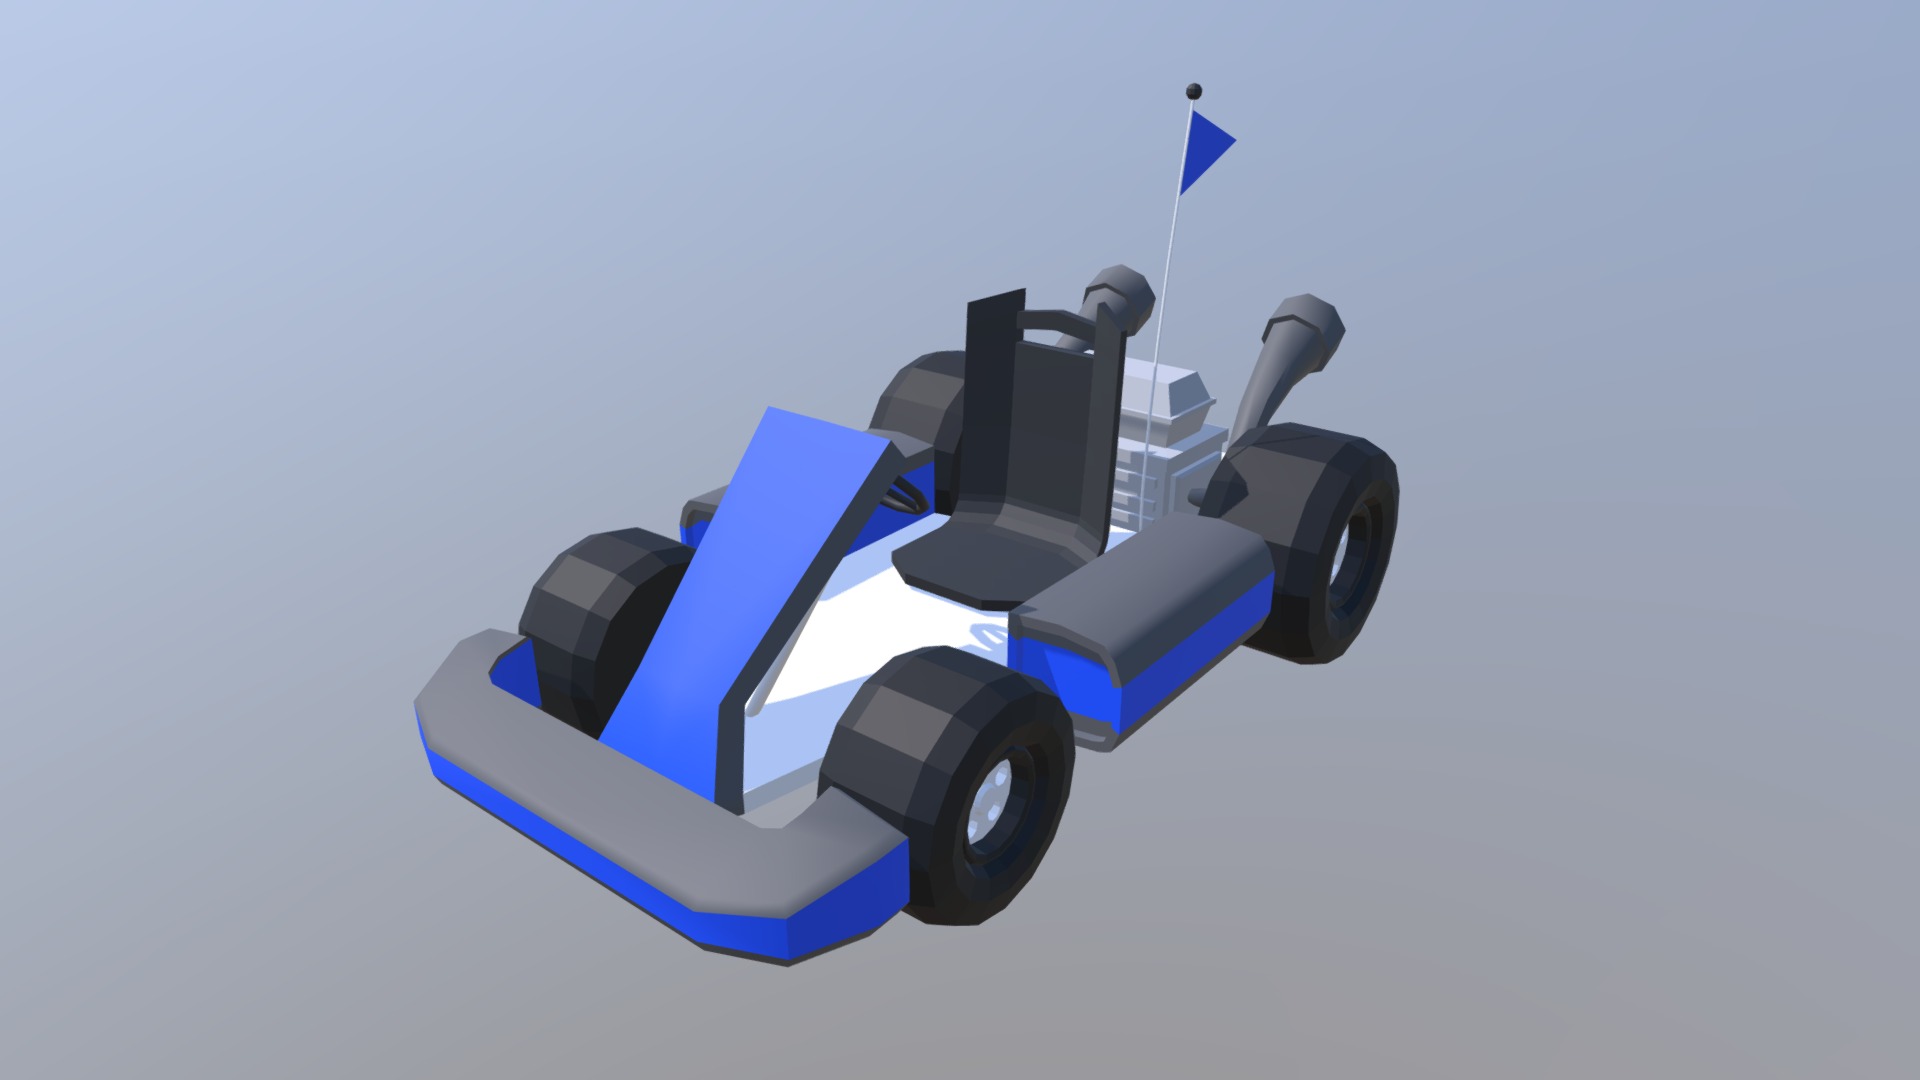 3D model Mini Kart 5 – Low Poly - This is a 3D model of the Mini Kart 5 - Low Poly. The 3D model is about a blue and white robot.